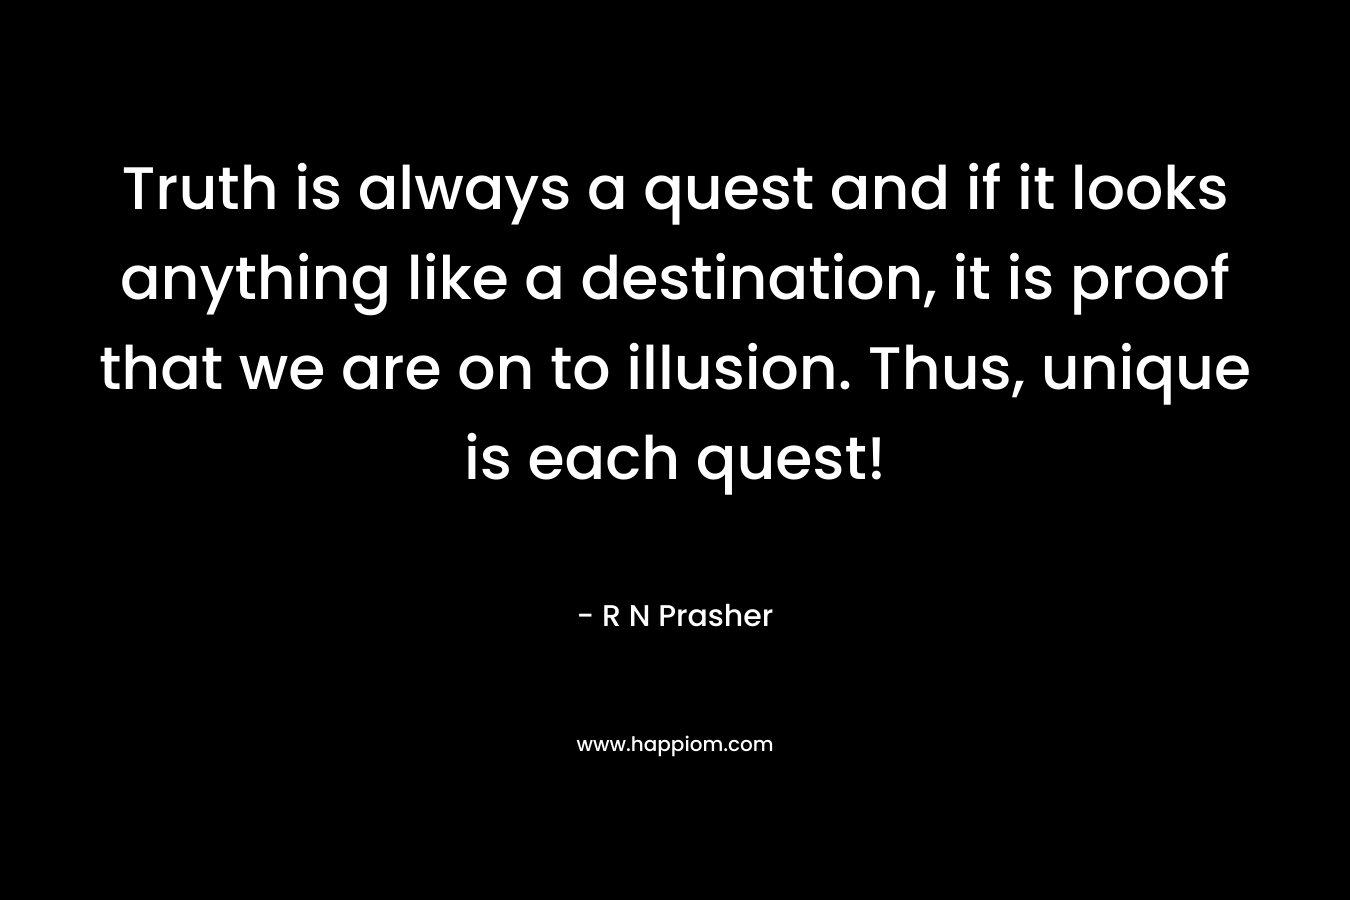 Truth is always a quest and if it looks anything like a destination, it is proof that we are on to illusion. Thus, unique is each quest! – R N Prasher